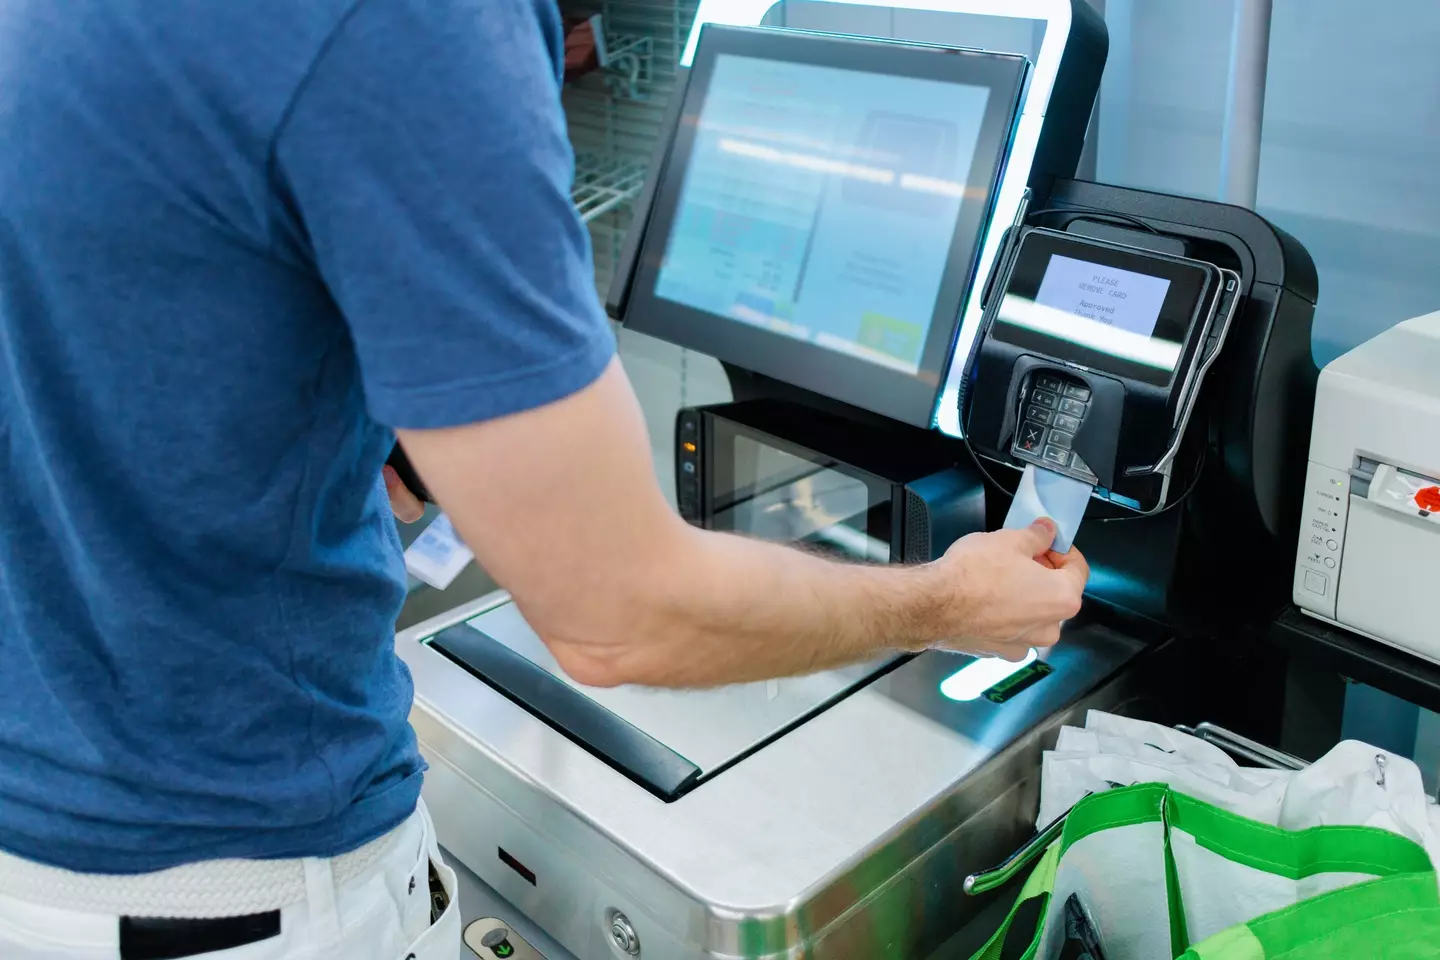 Booths has got rid of self-checkout machines in 26 of its stores.